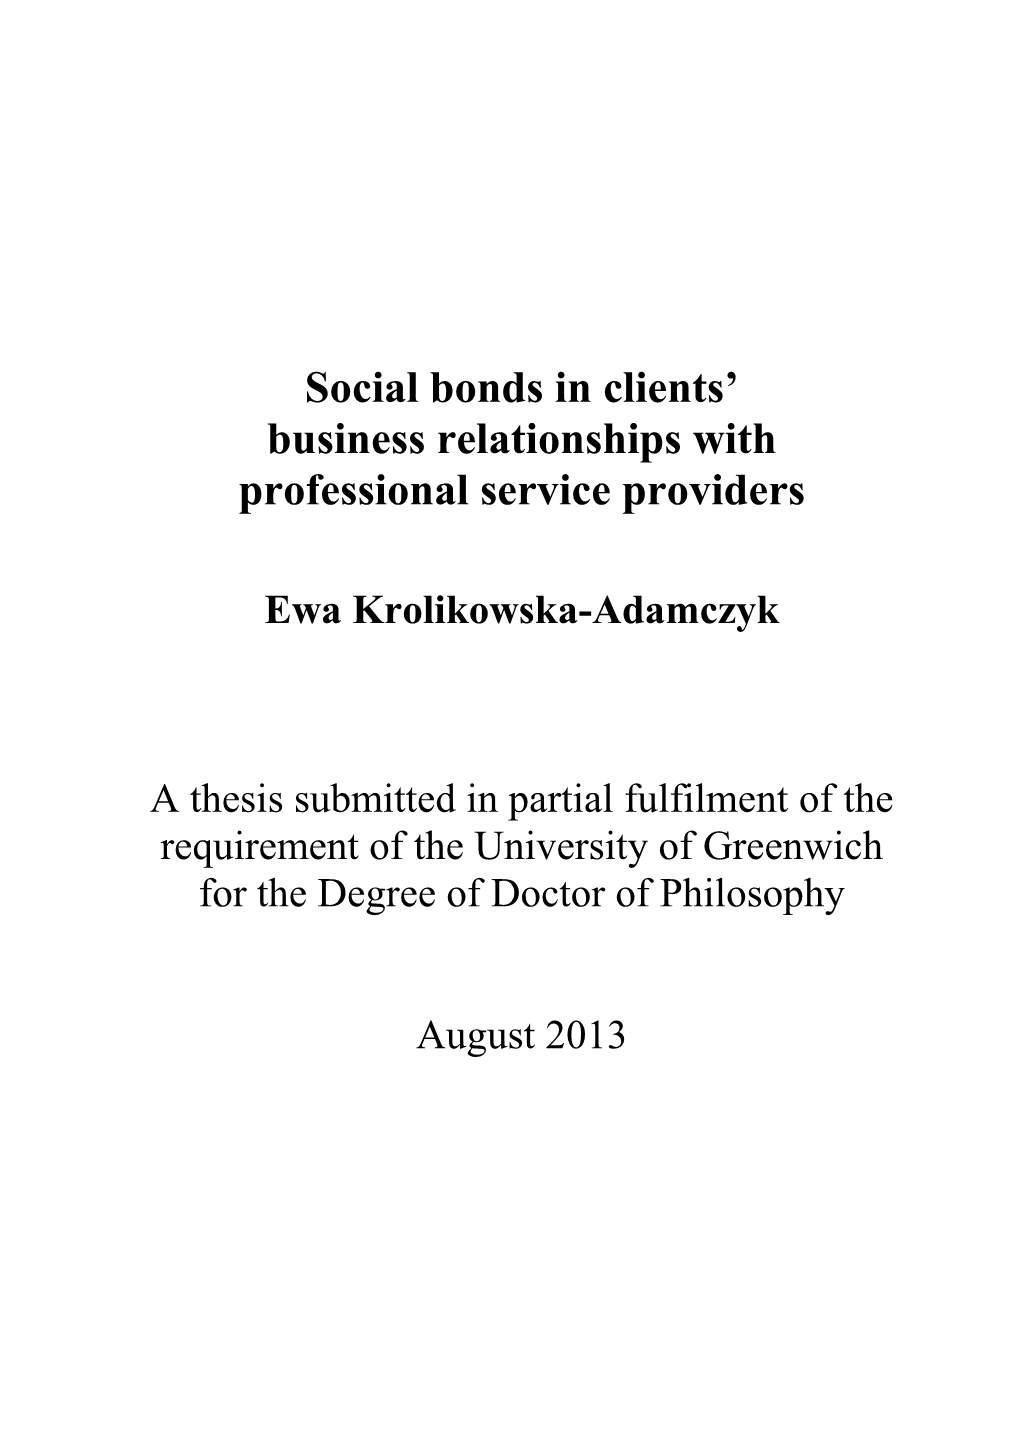 Social Bonds in Clients' Business Relationships with Professional